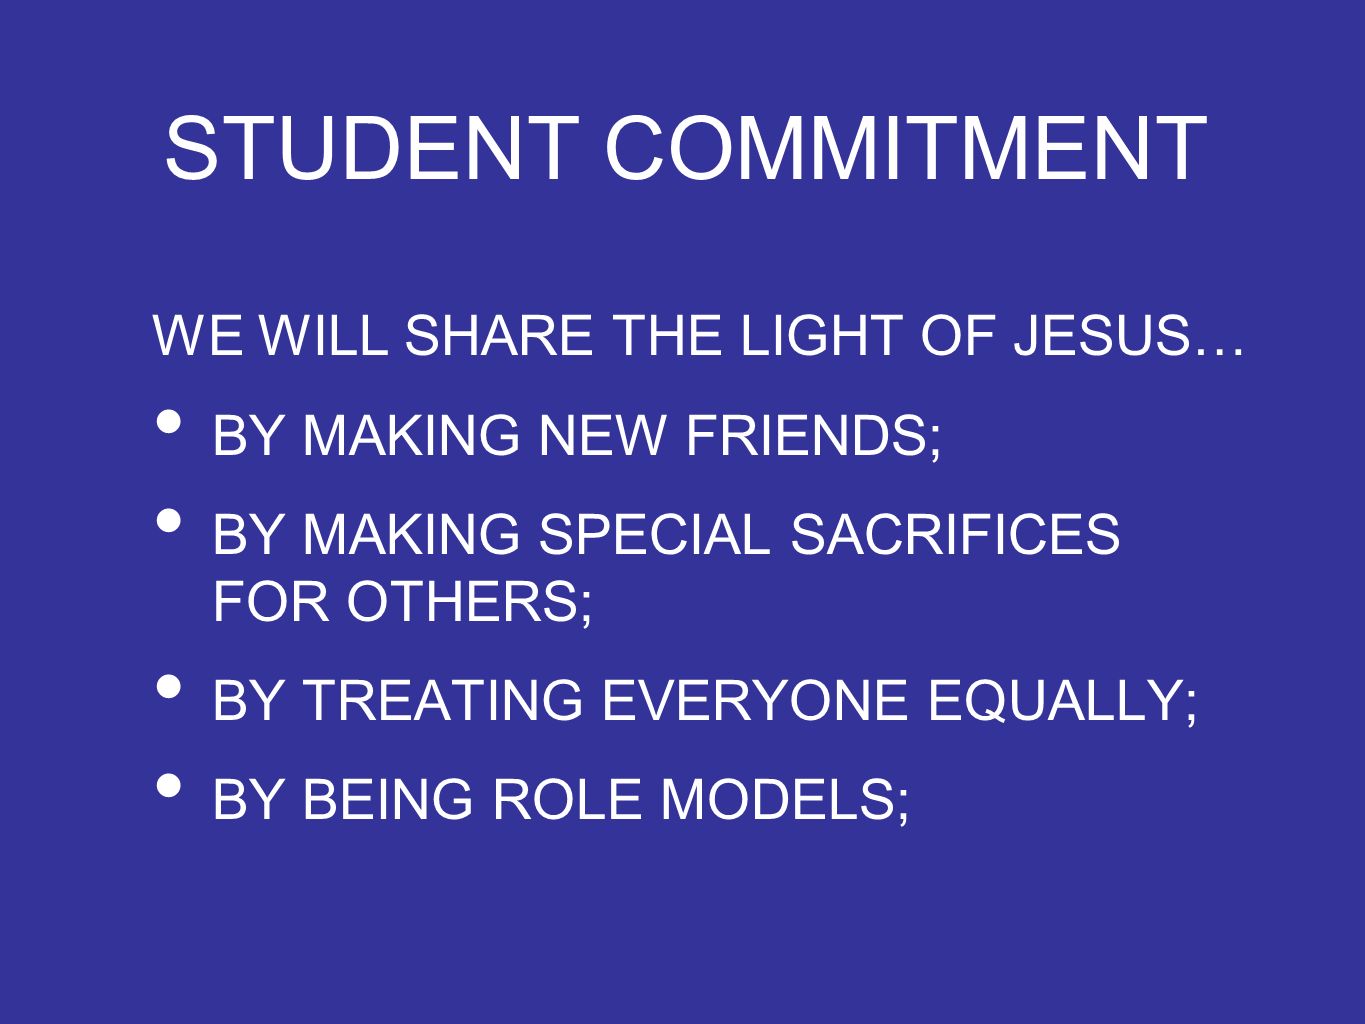 STUDENT COMMITMENT WE WILL SHARE THE LIGHT OF JESUS… BY MAKING NEW FRIENDS; BY MAKING SPECIAL SACRIFICES FOR OTHERS; BY TREATING EVERYONE EQUALLY; BY BEING ROLE MODELS;